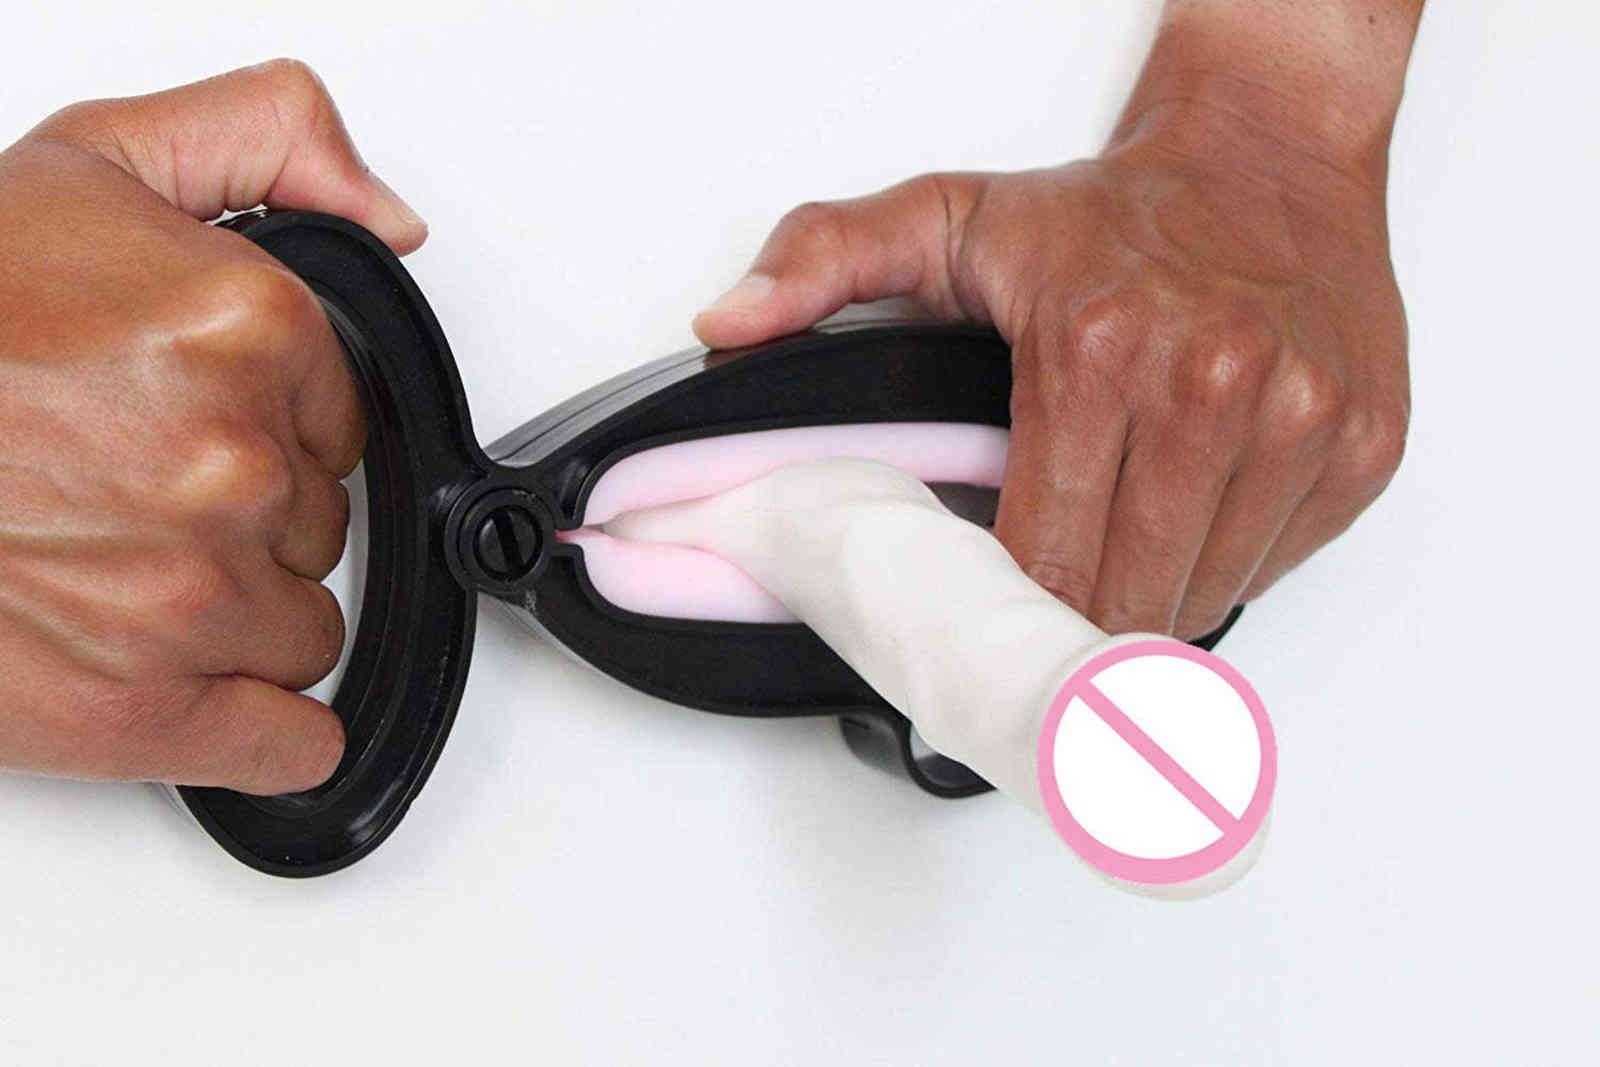 NXYSex Pump Toys Sex Shop Male Penis Stretch Massage Clip Enlargement  Exercise Extender Dick Tool Adult Toys For Men 1125 From Newsex, $23.81